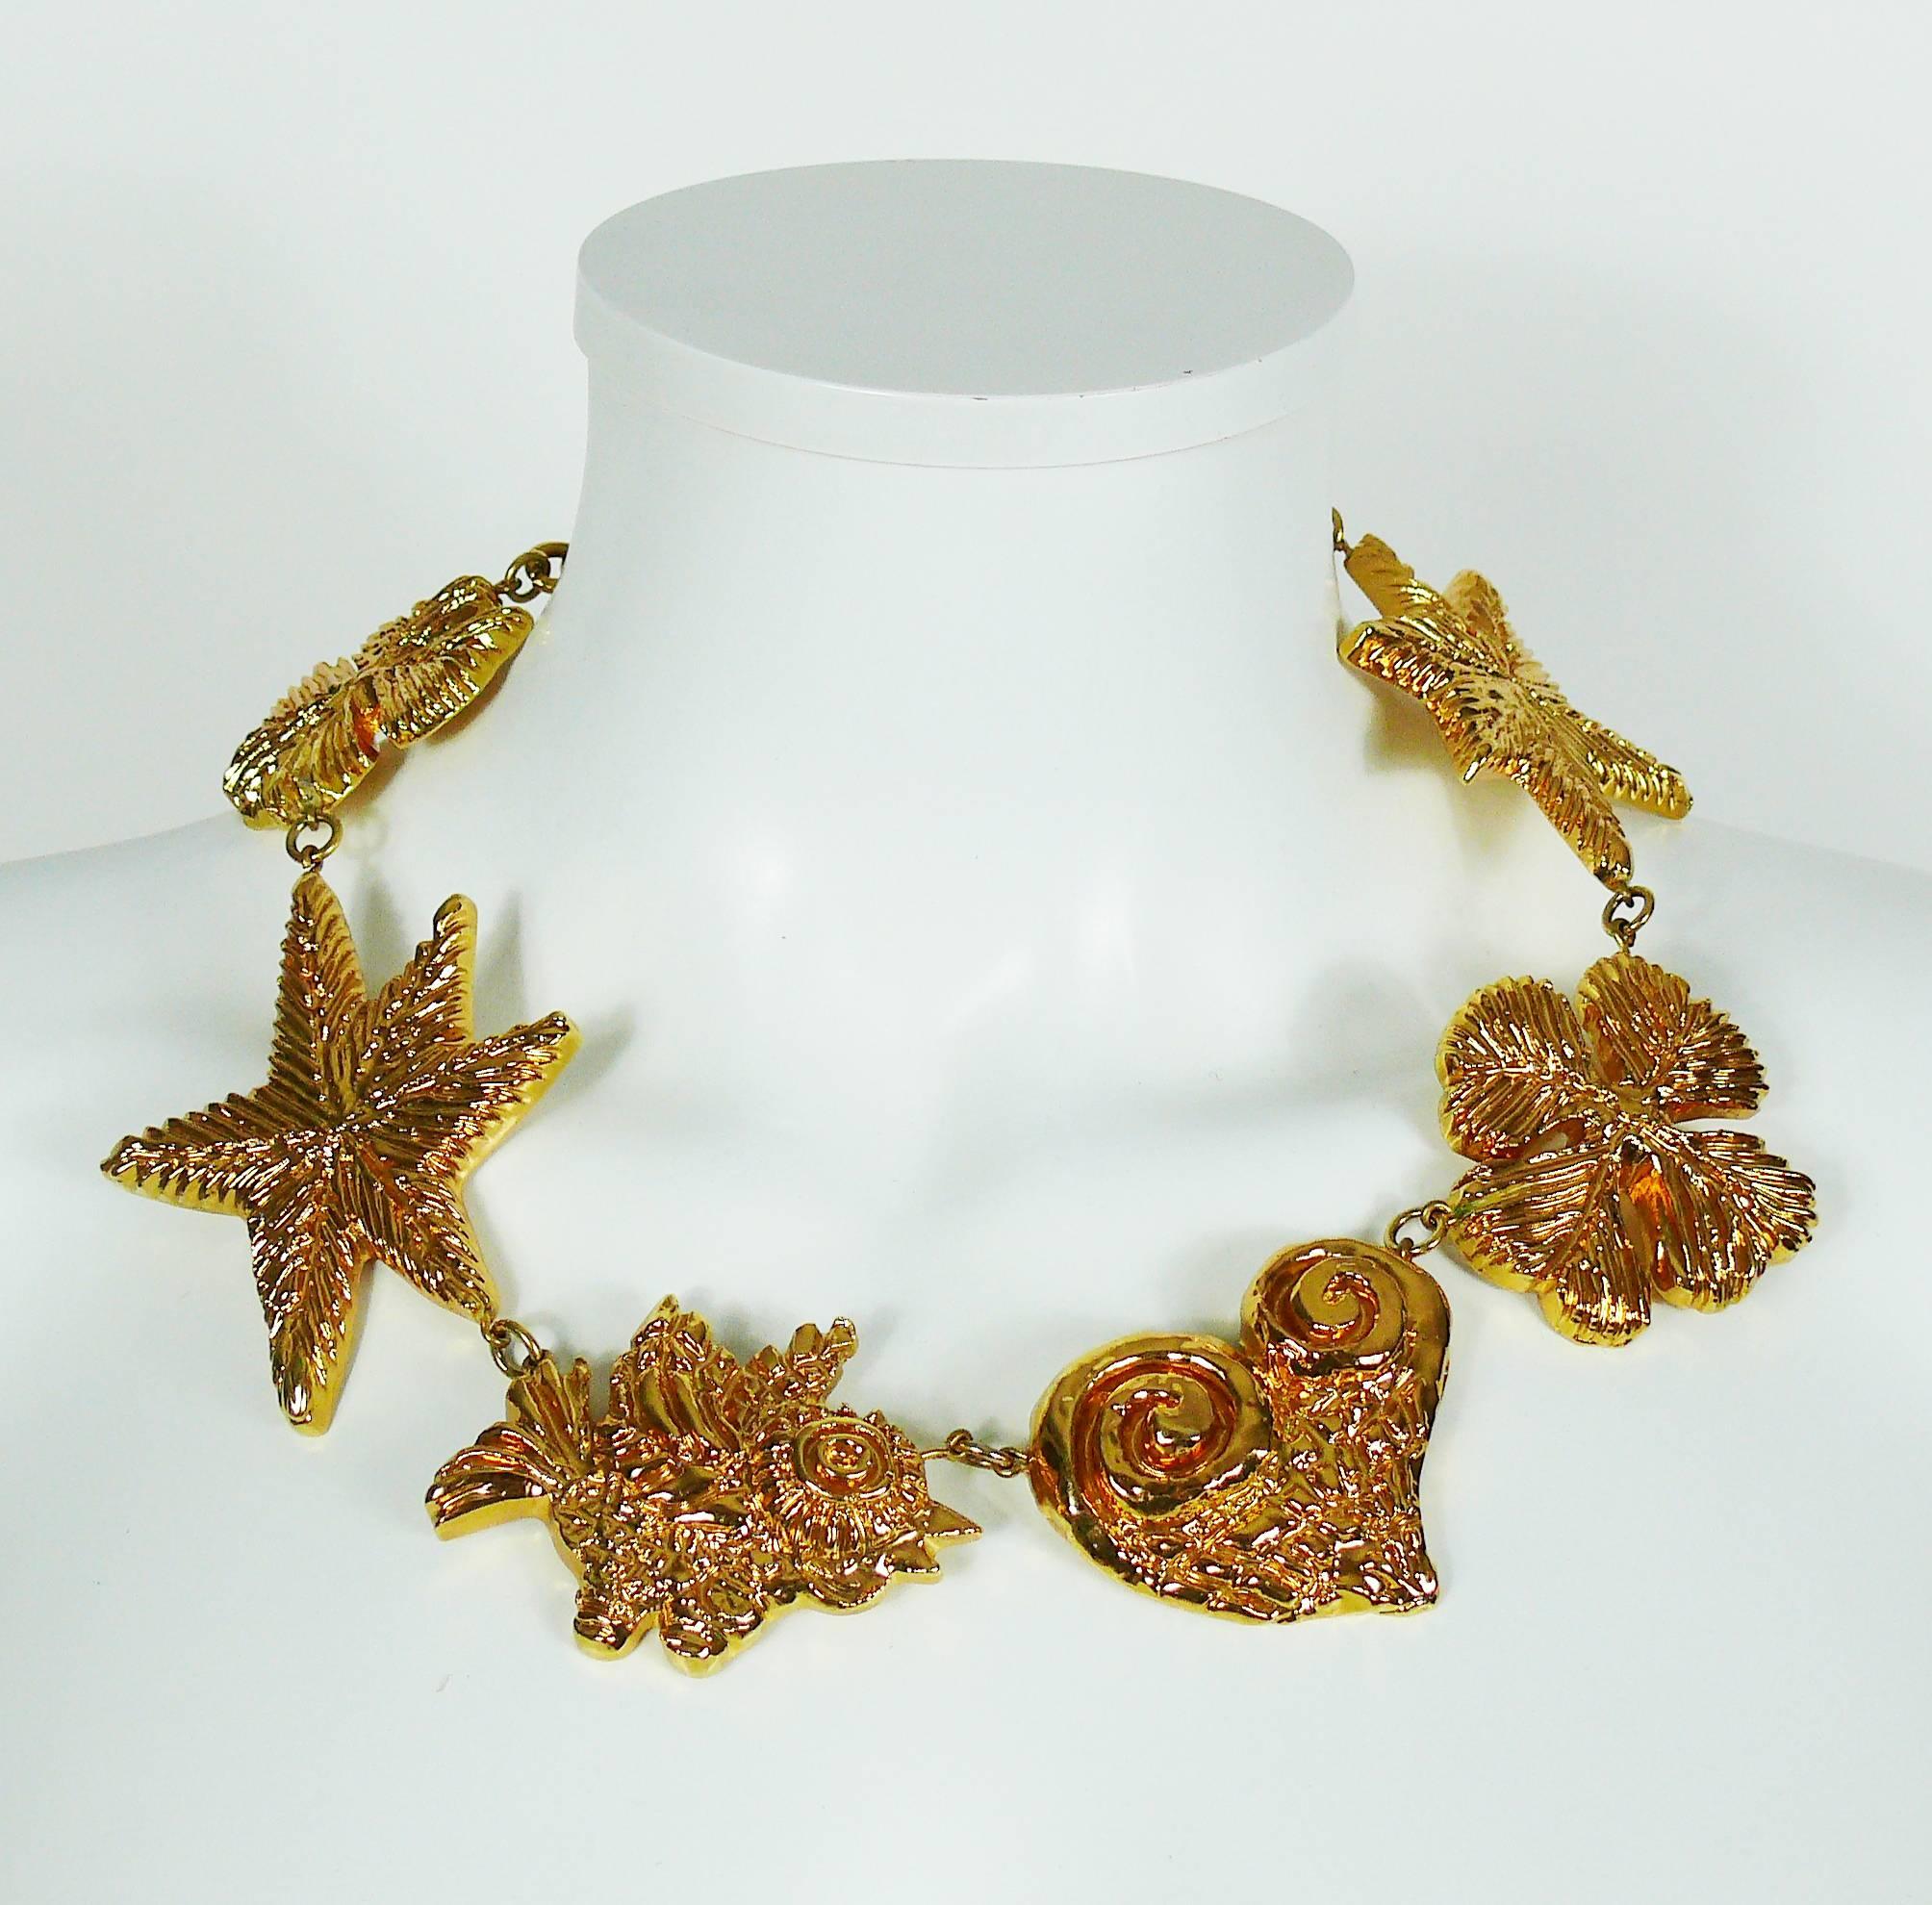 CHRISTIAN LACROIX vintage massive gold toned necklace consisting of six large resin iconic links featuring clovers, stars, heart and bird.

Hook clasp closure.
Extension chain.

Marked CHRISTIAN LACROIX CL Made in France.

Indicative measurements :